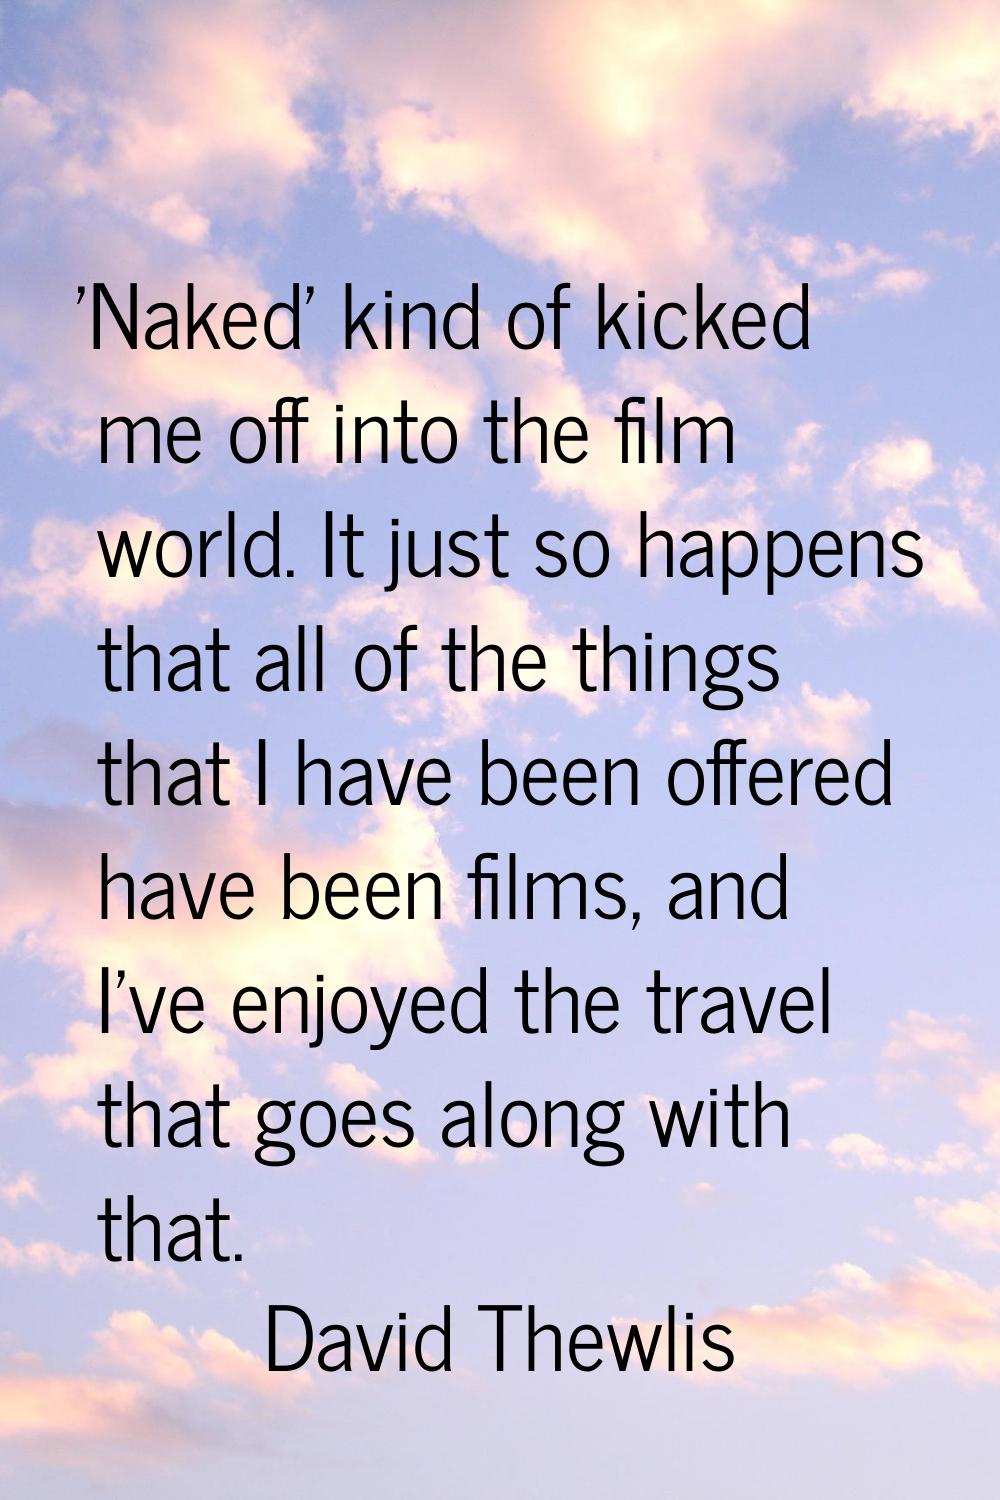 'Naked' kind of kicked me off into the film world. It just so happens that all of the things that I